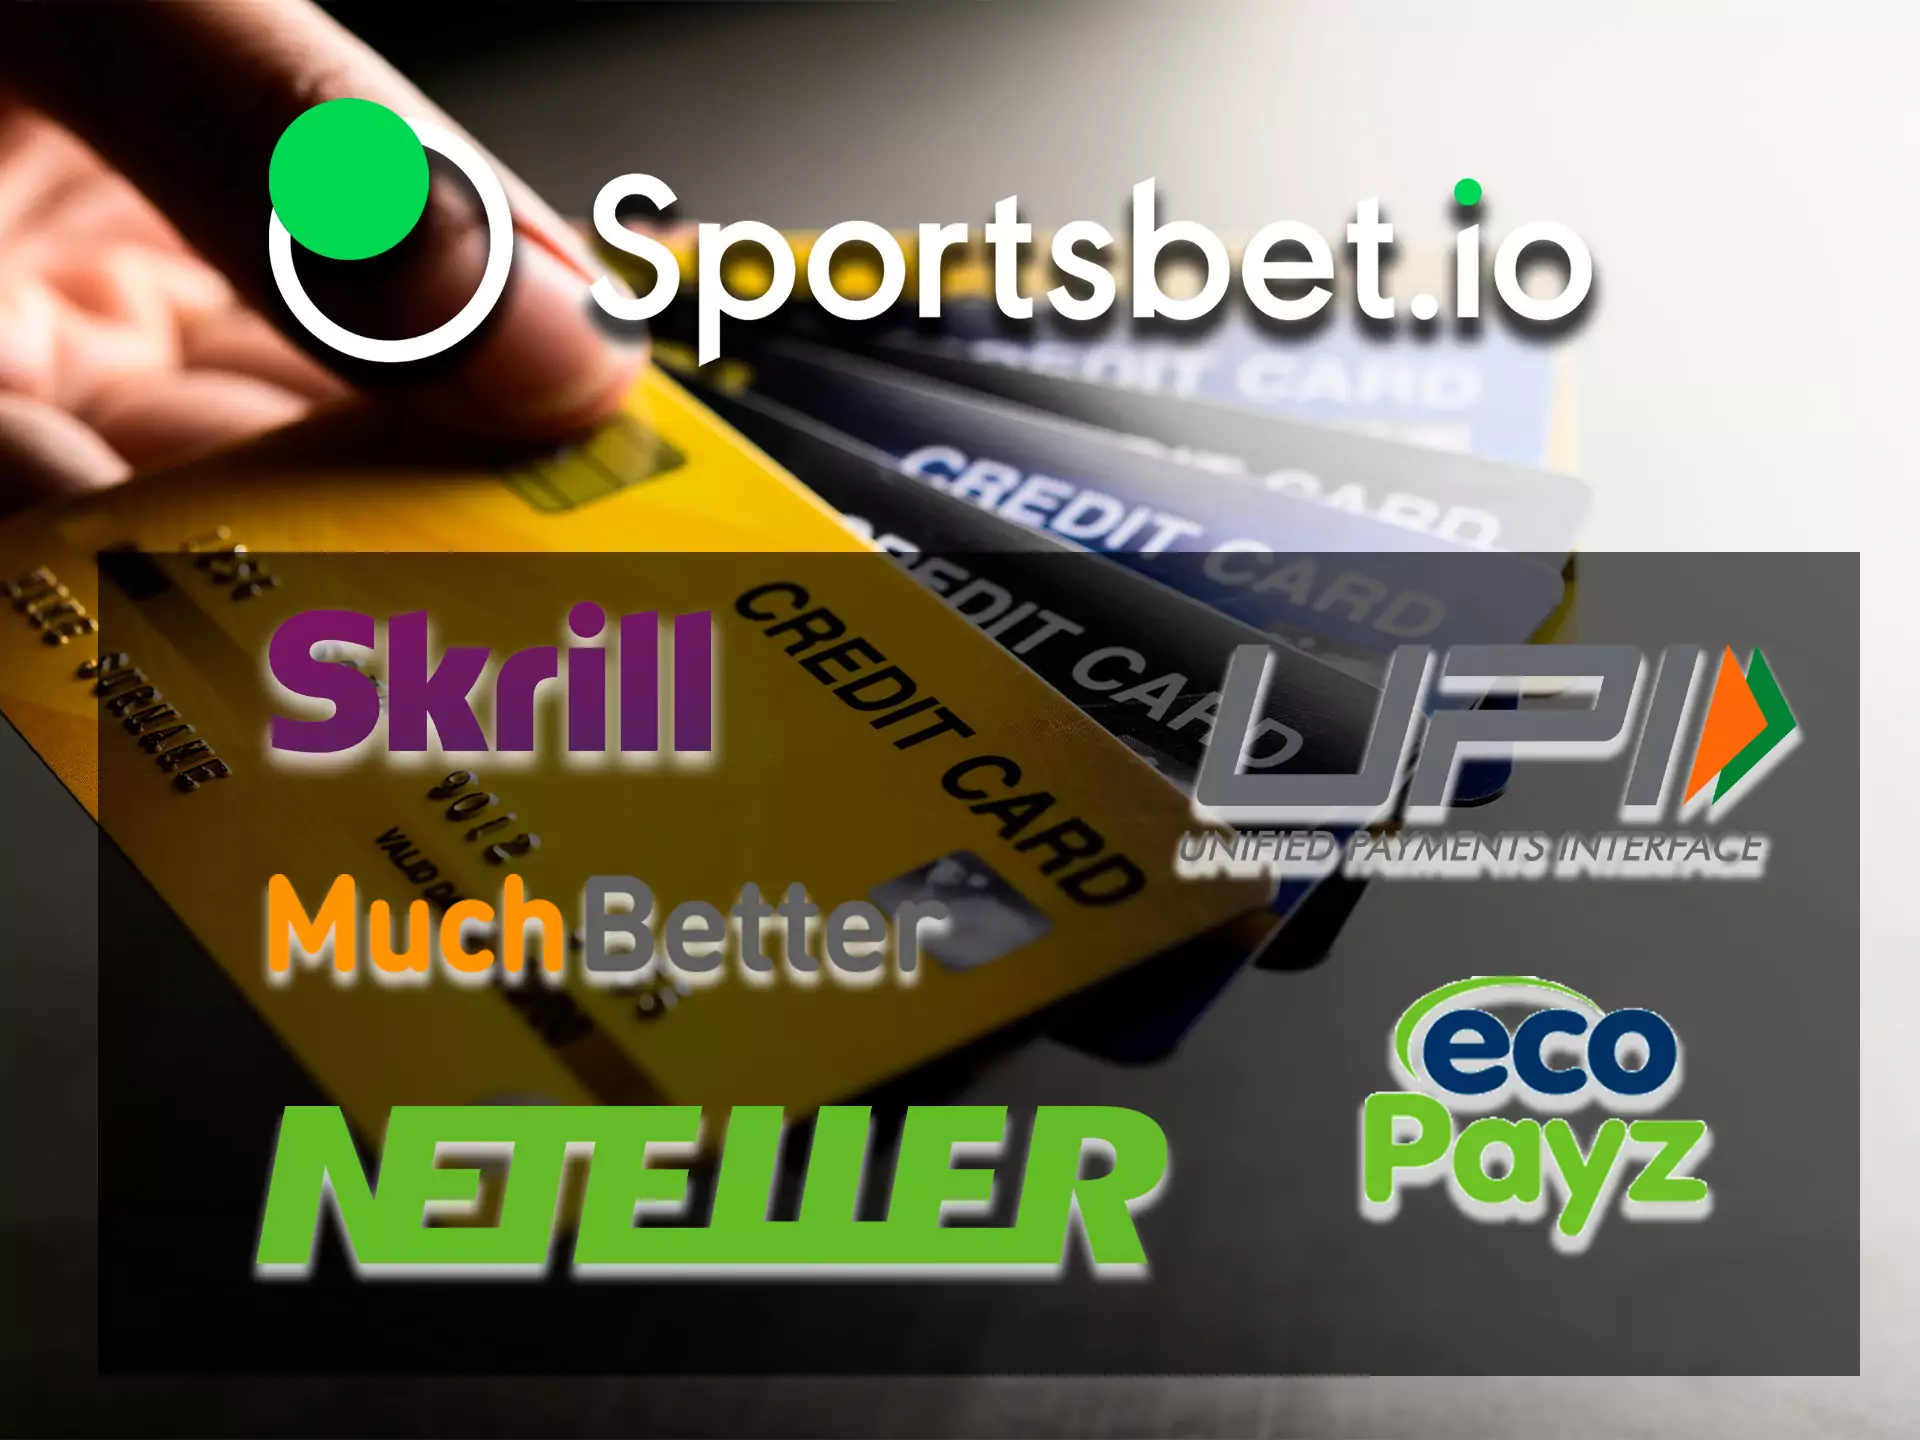 All the popular e-wallets are available at Sportsbet.